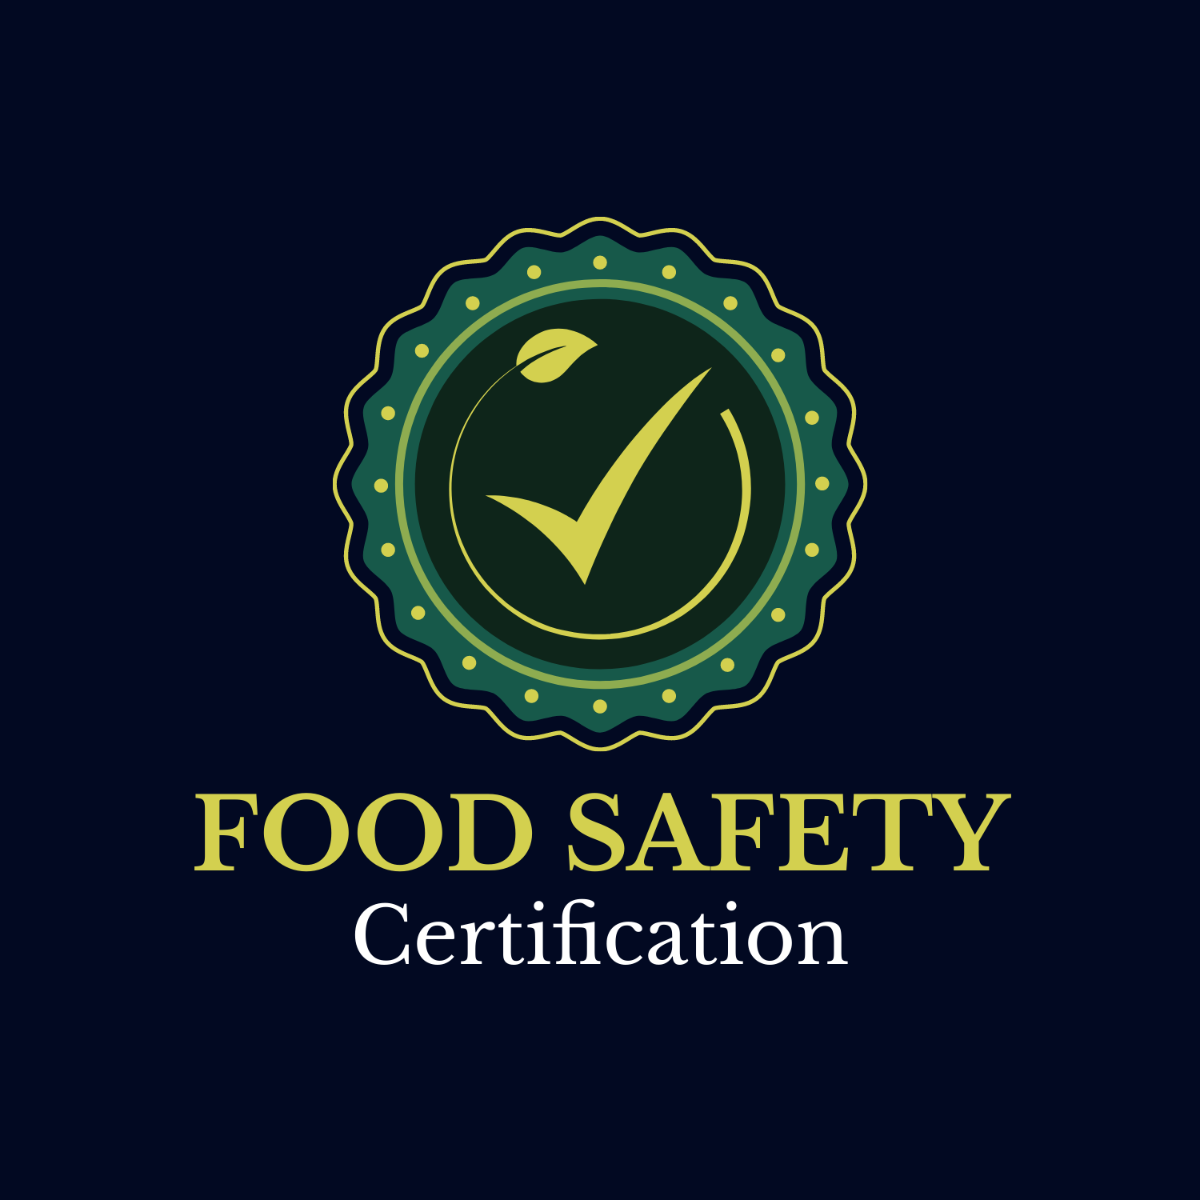 Food Safety Certification Logo Template